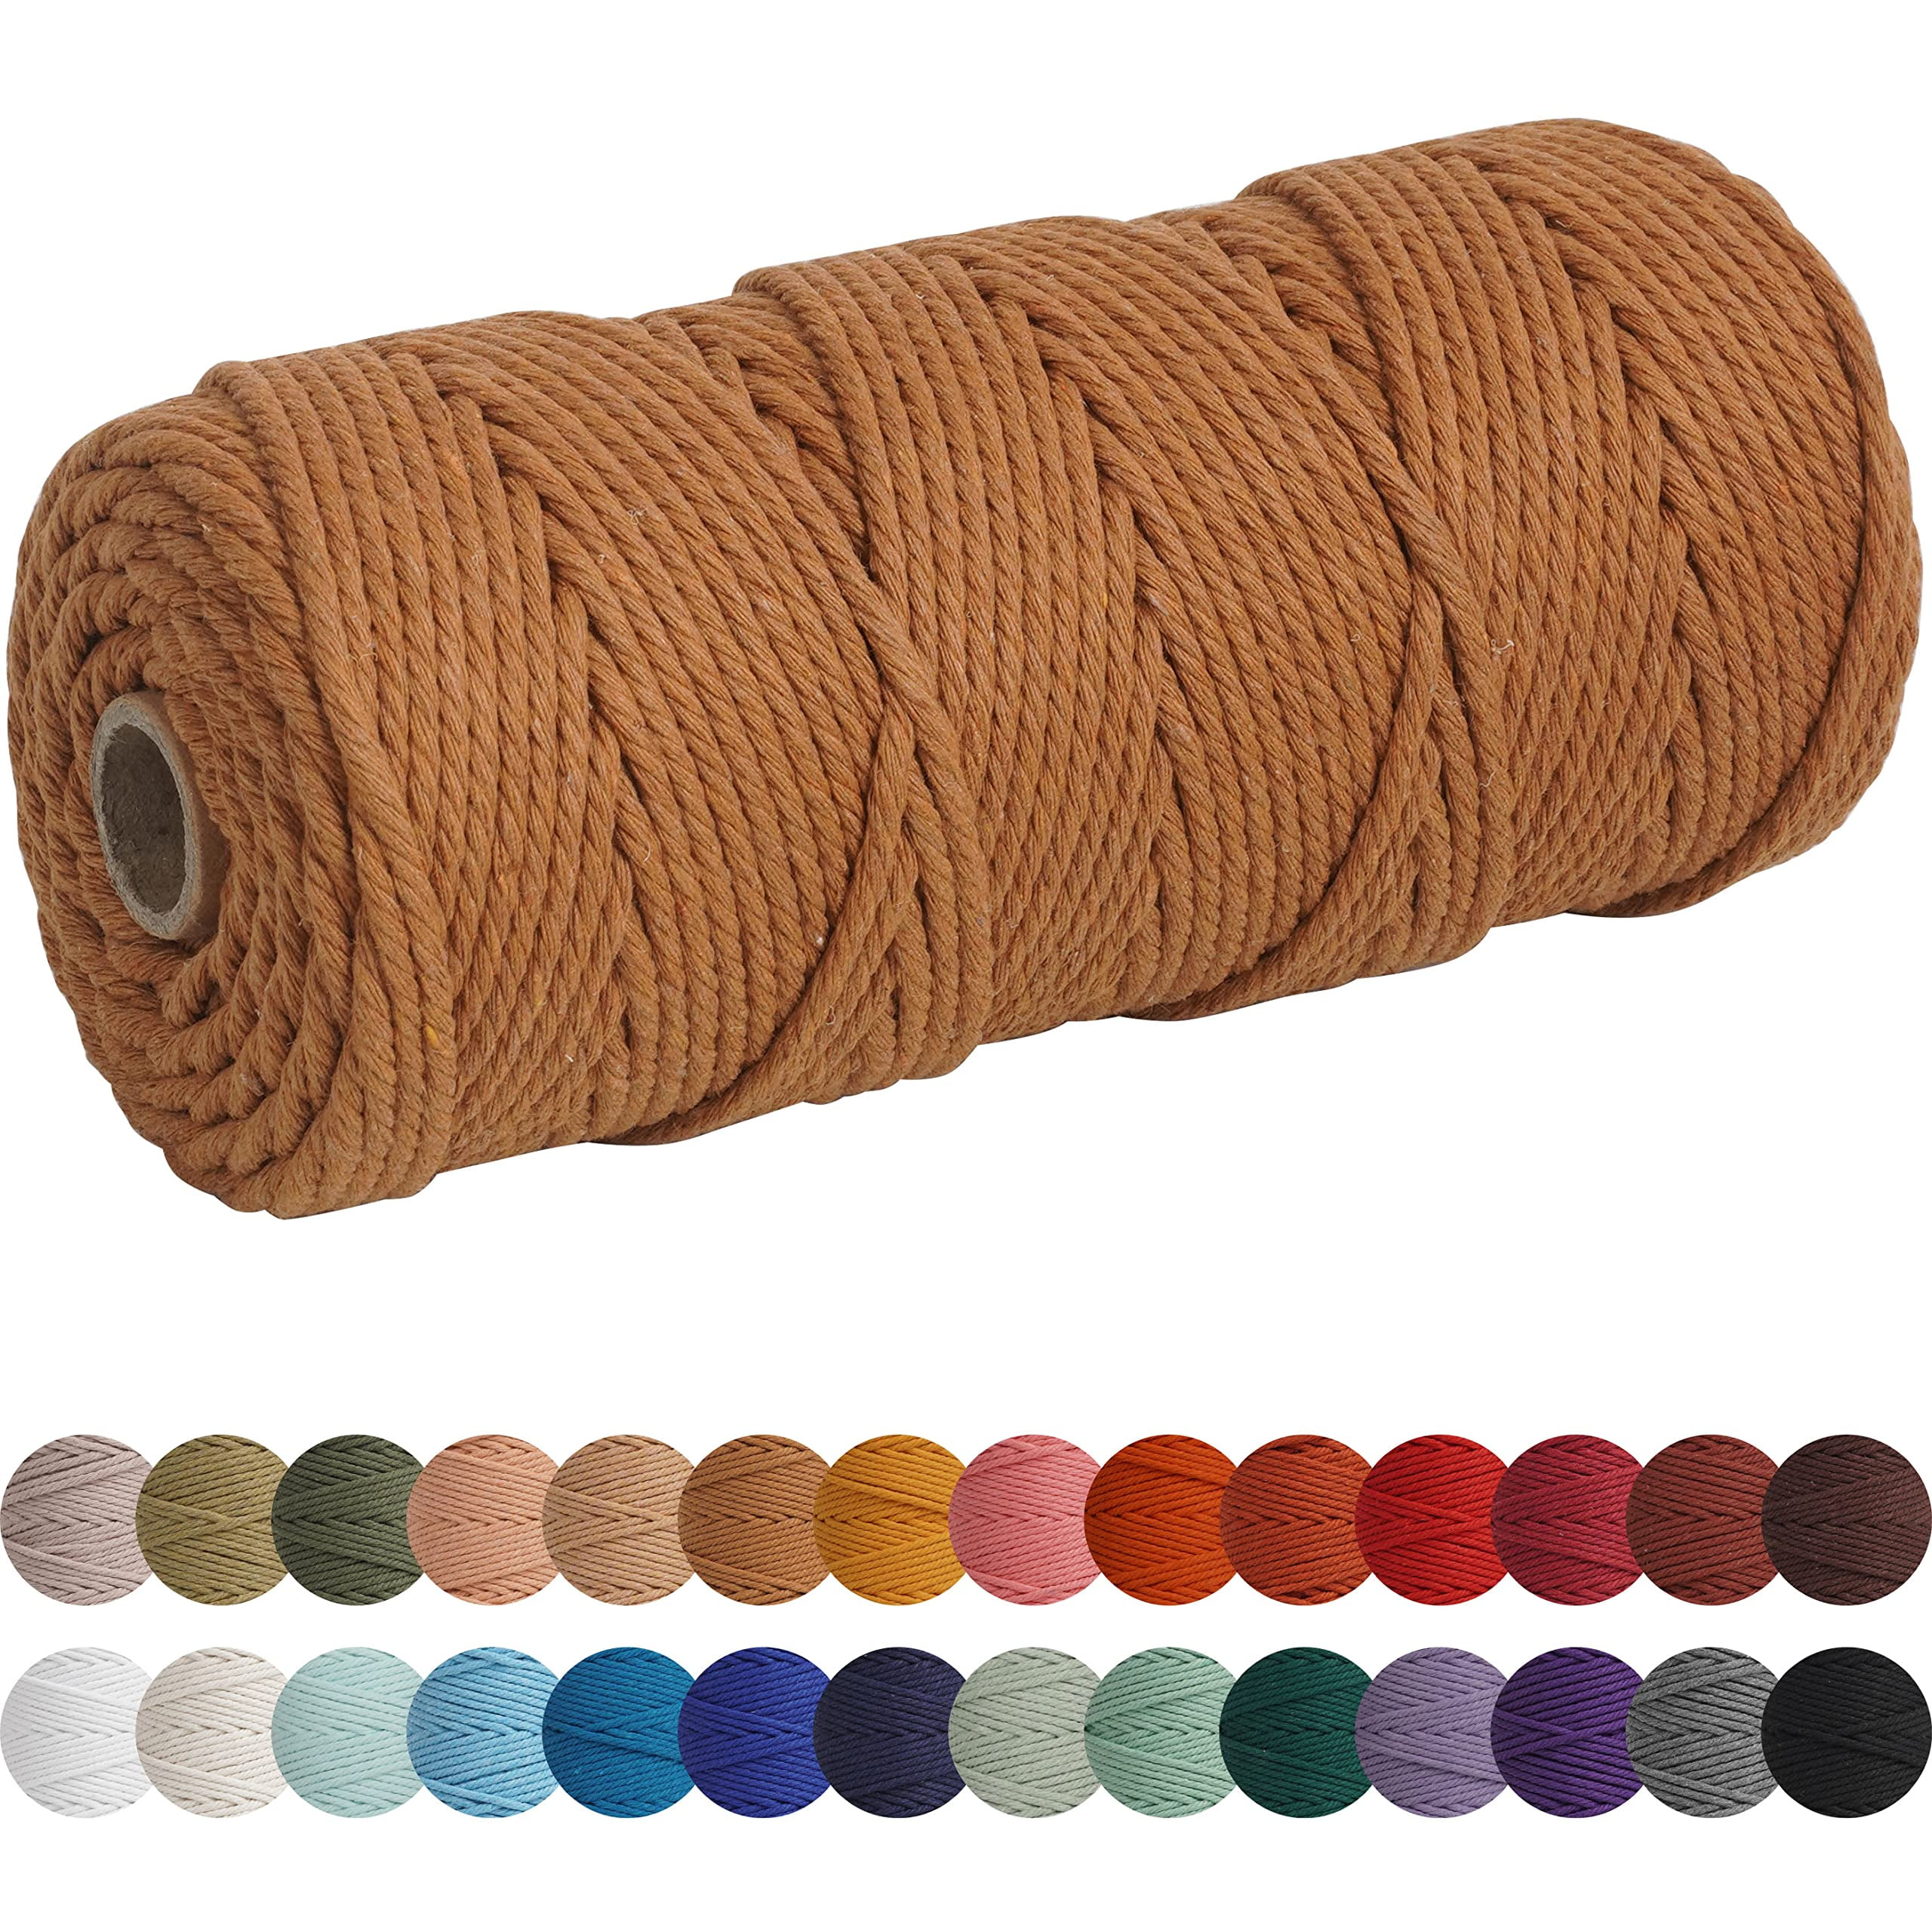 Hot Sale Multi Color Handmade Thin Cotton Cord Rope - China Rope